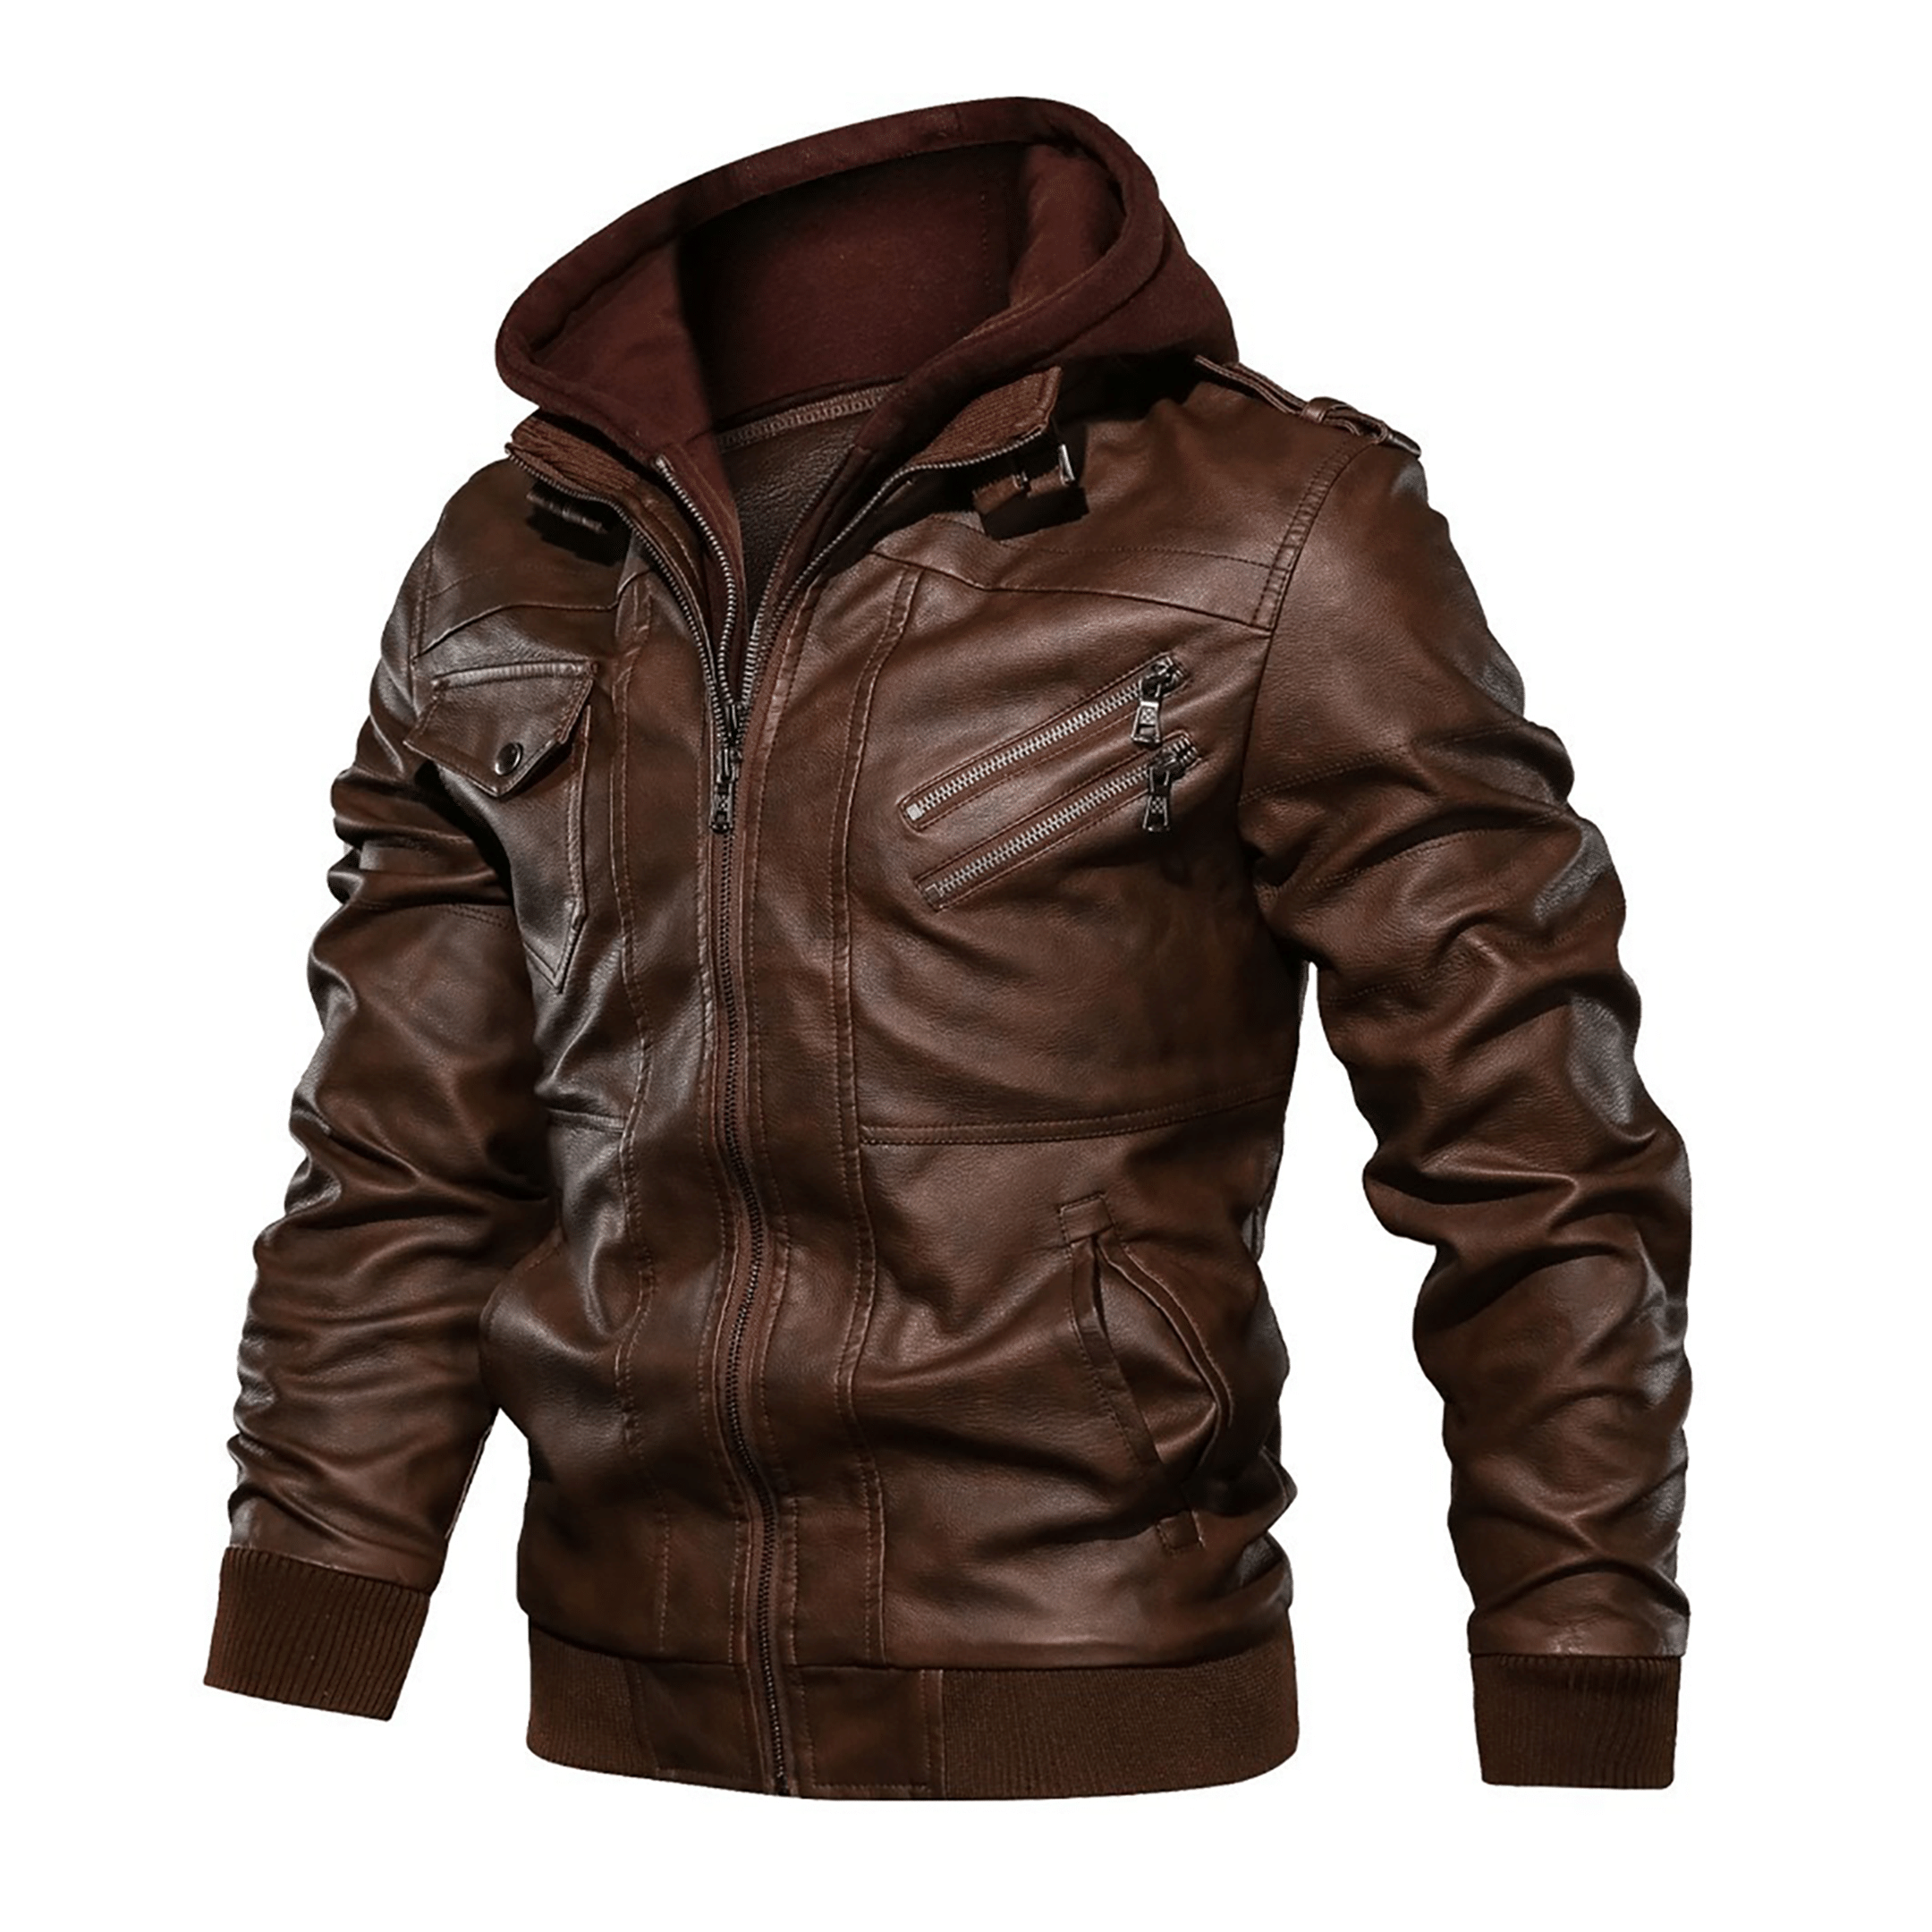 Top leather jackets and latest products 487